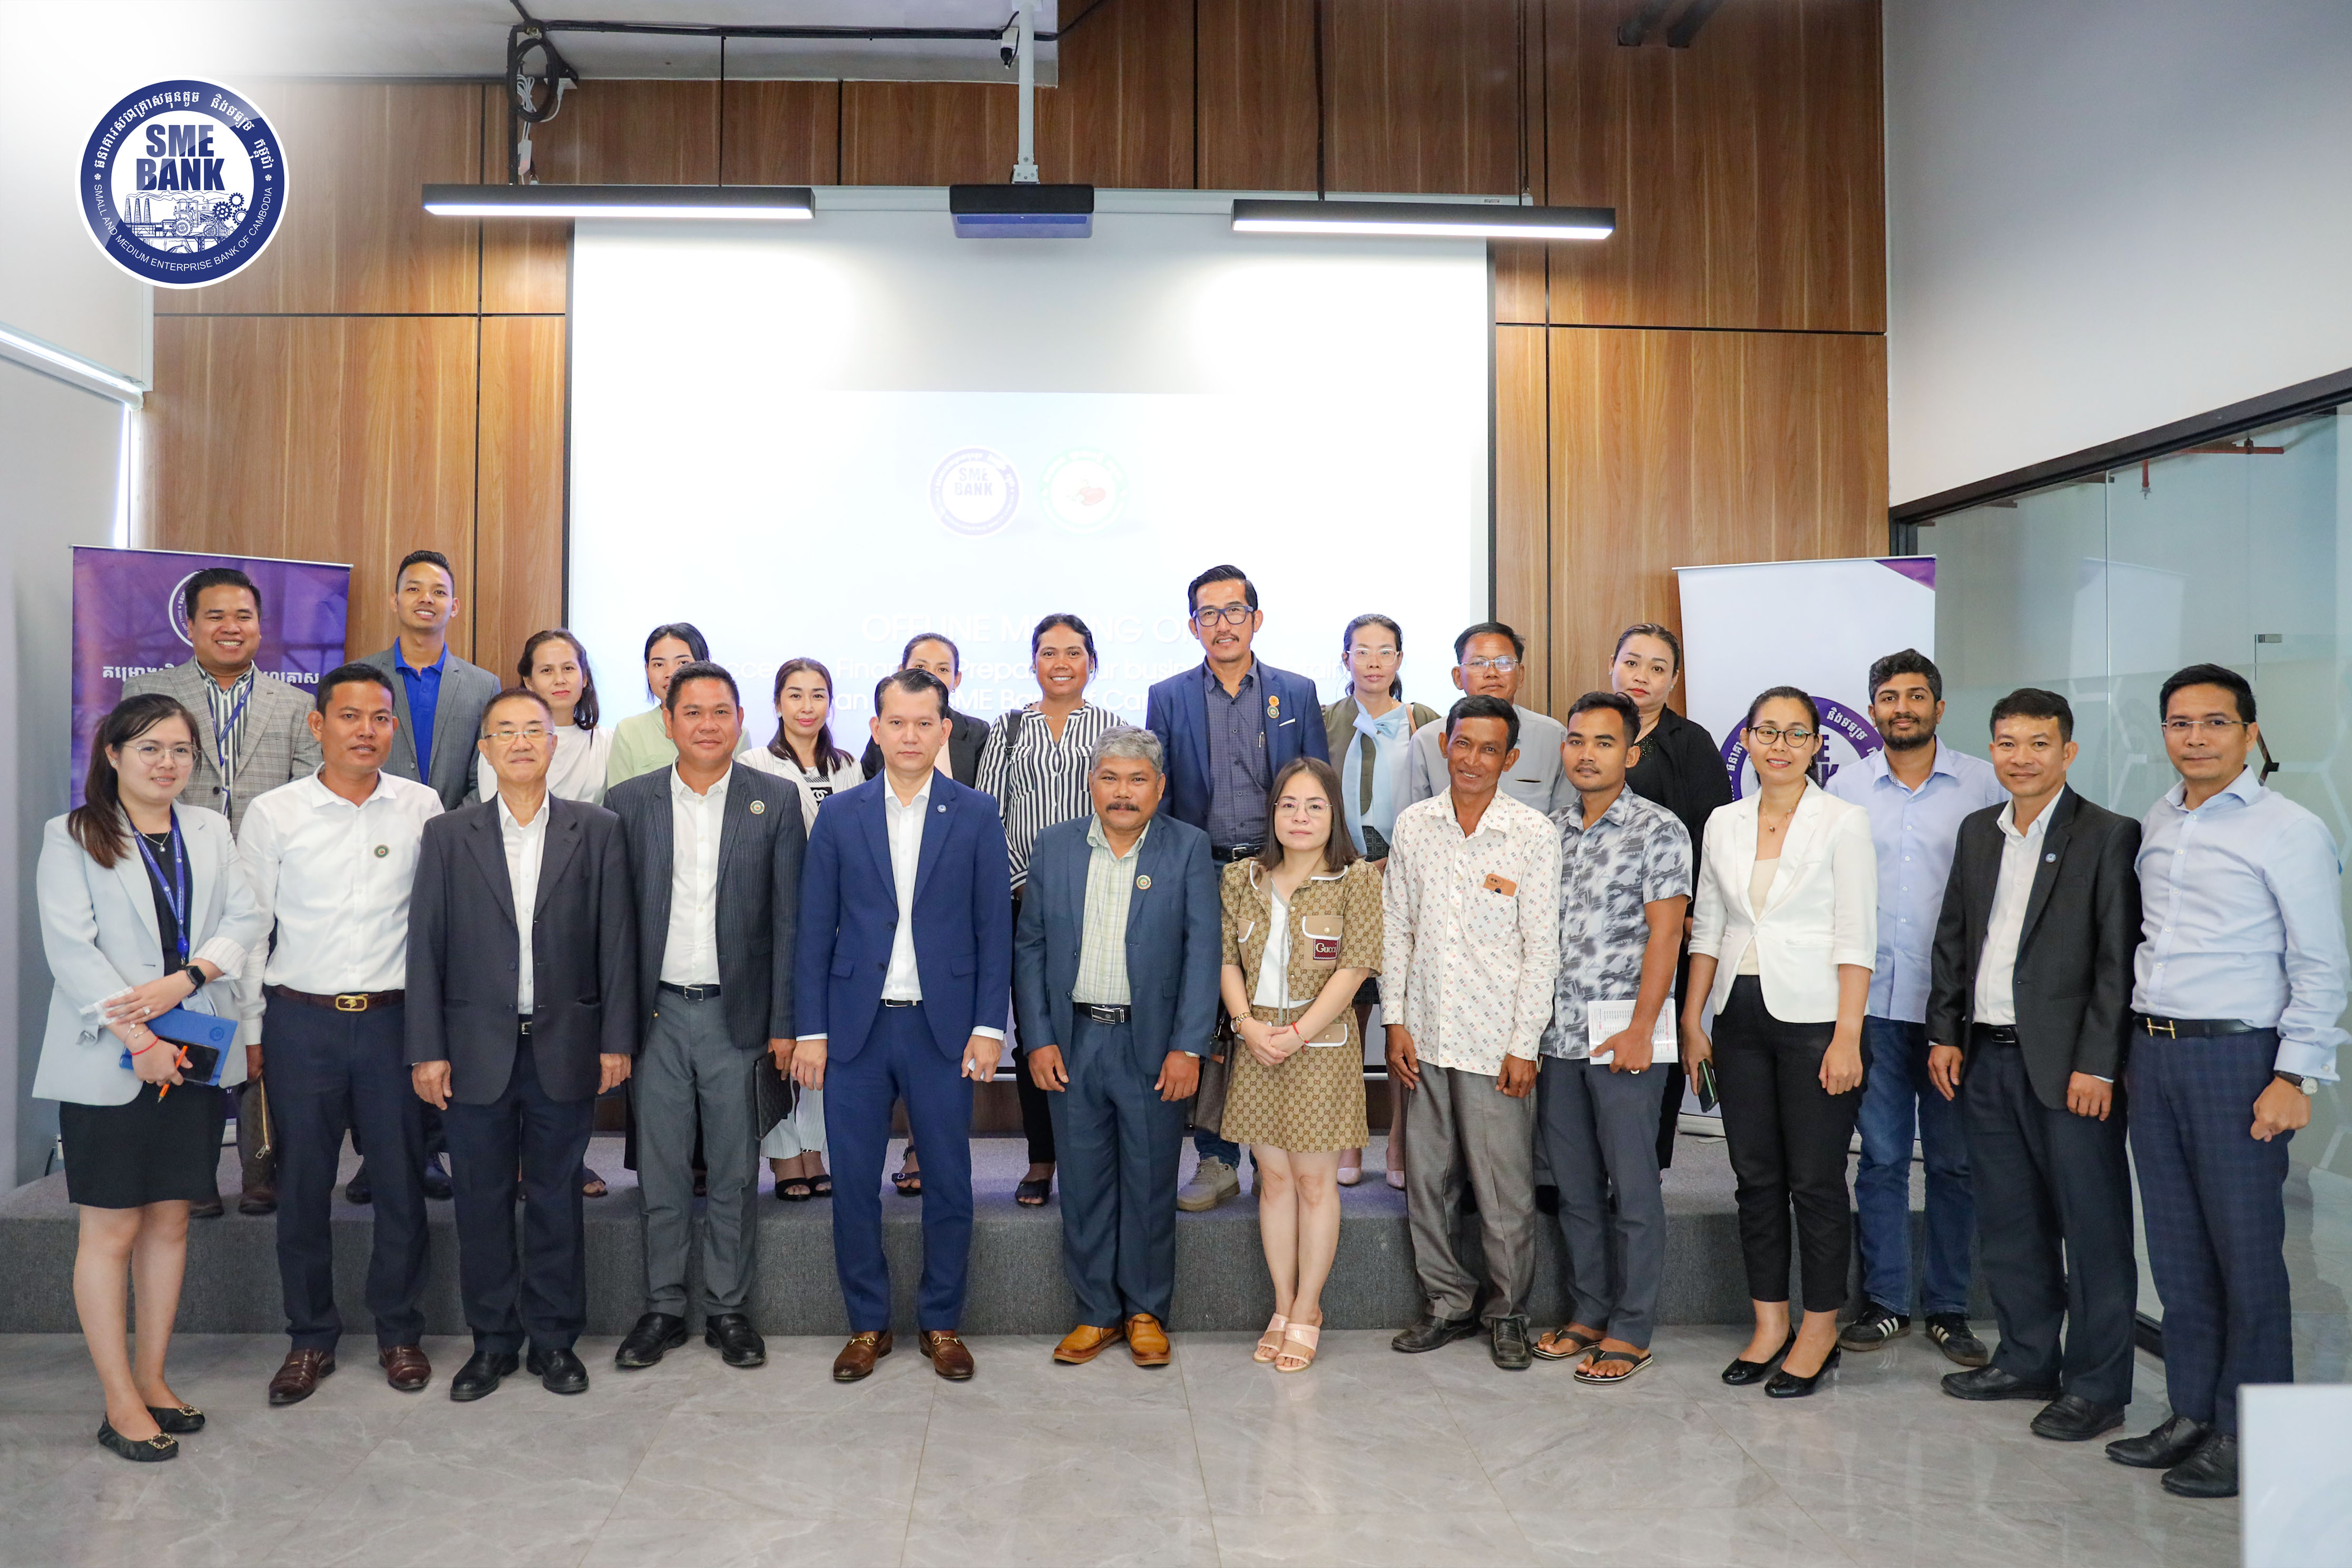 SME Bank collaborates with Cashew Nut Association of Cambodia organize a seminar on “Access to Finance: Prepare your business to obtain a loan from SME Bank of Cambodia”